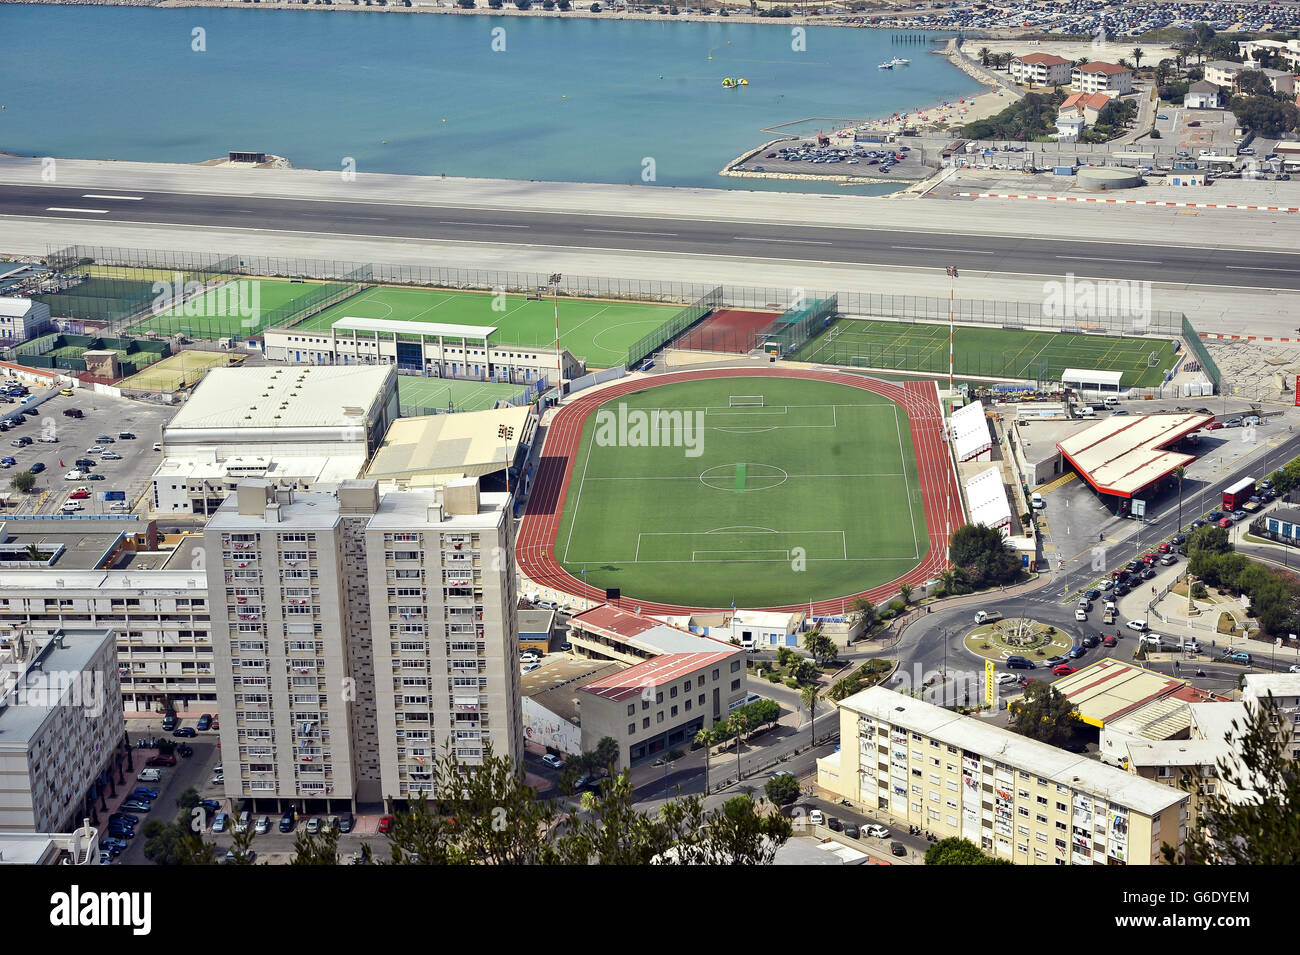 A general view of the Gibraltar runway with football pitches and sports facilities below. Stock Photo